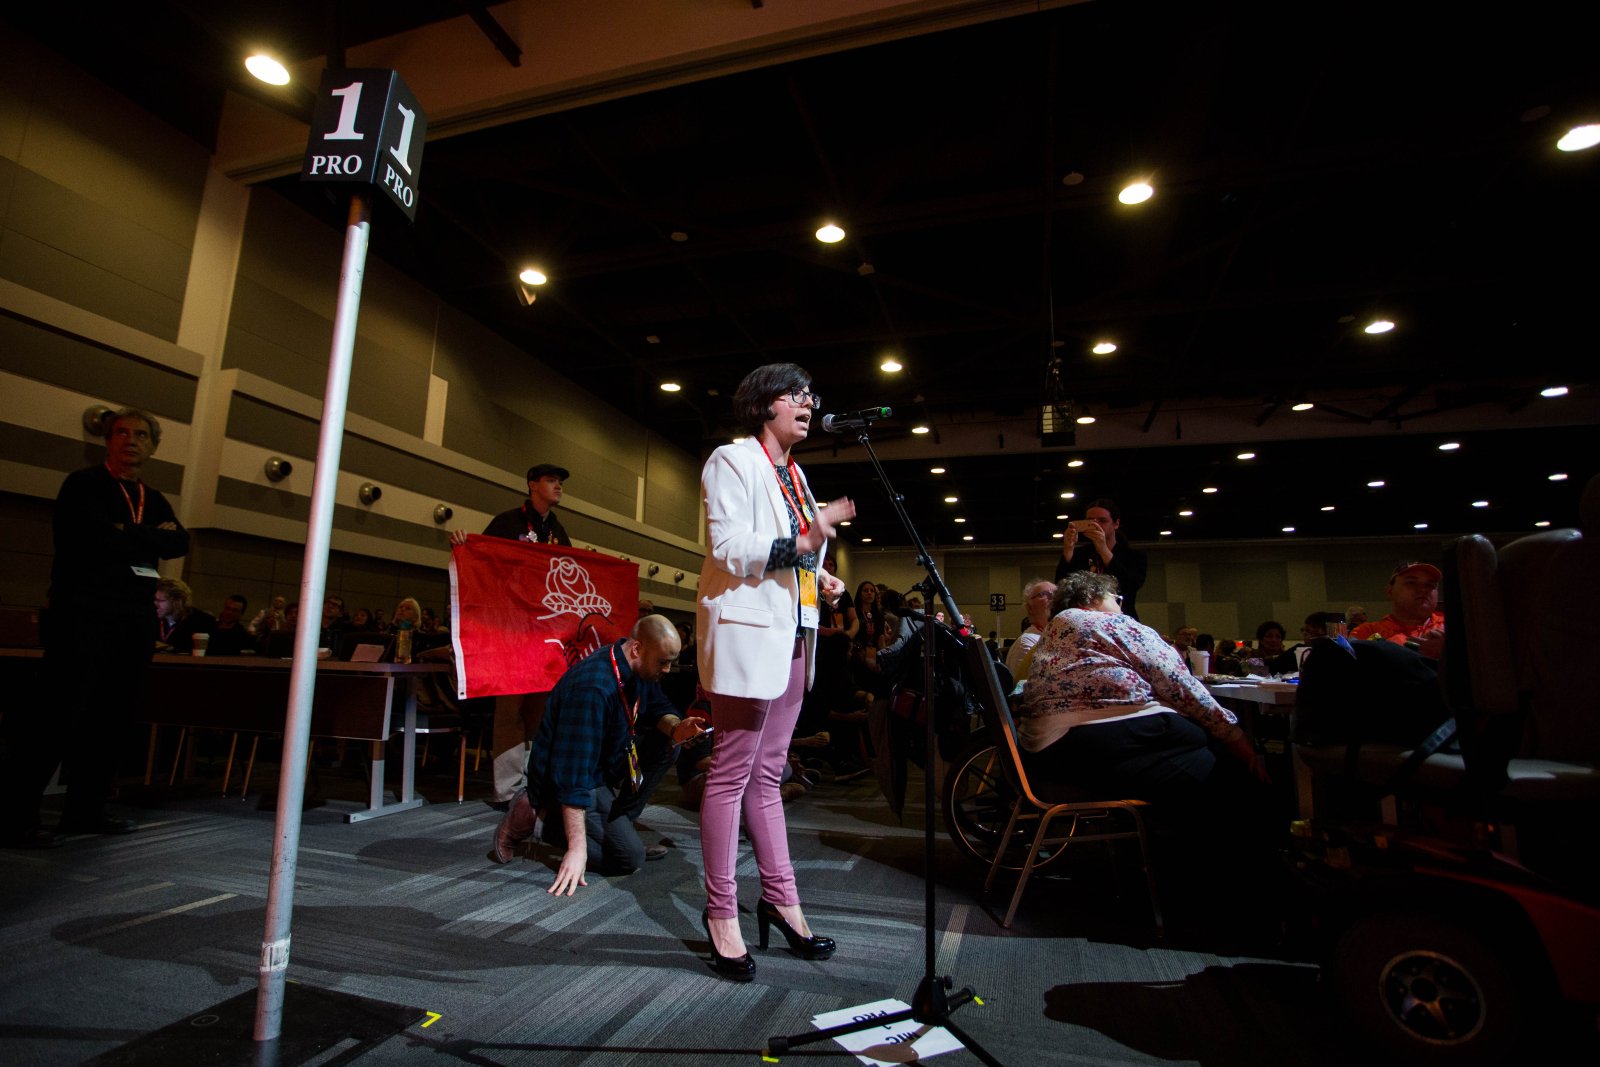 Niki Ashton speaks in support of a motion on Sunday, February 18th 2018, day three of the New Democratic Party 2018 policy convention held at the Shaw Convention Centre in Ottawa. Photo by Alex Tétreault